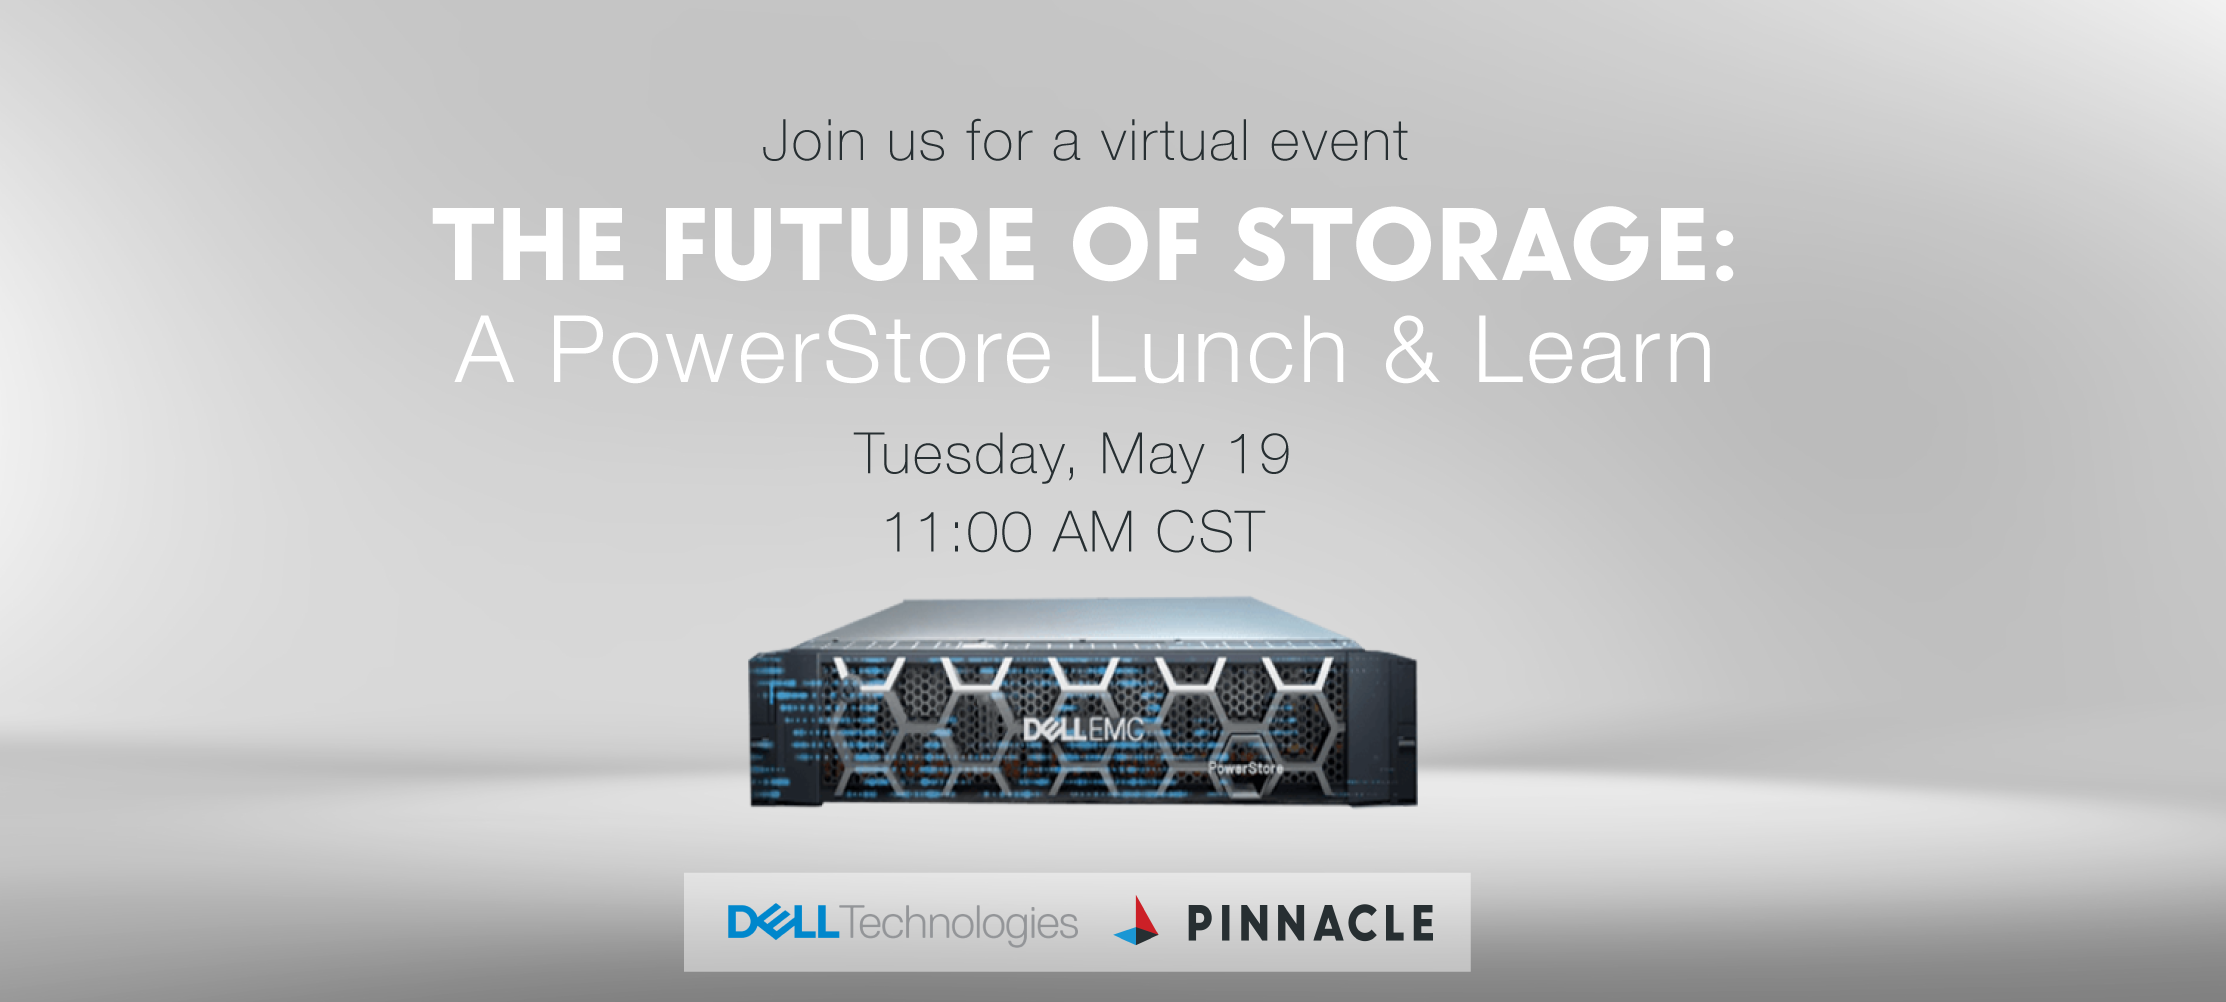 The Future of Storage: PowerStore Lunch & Learn